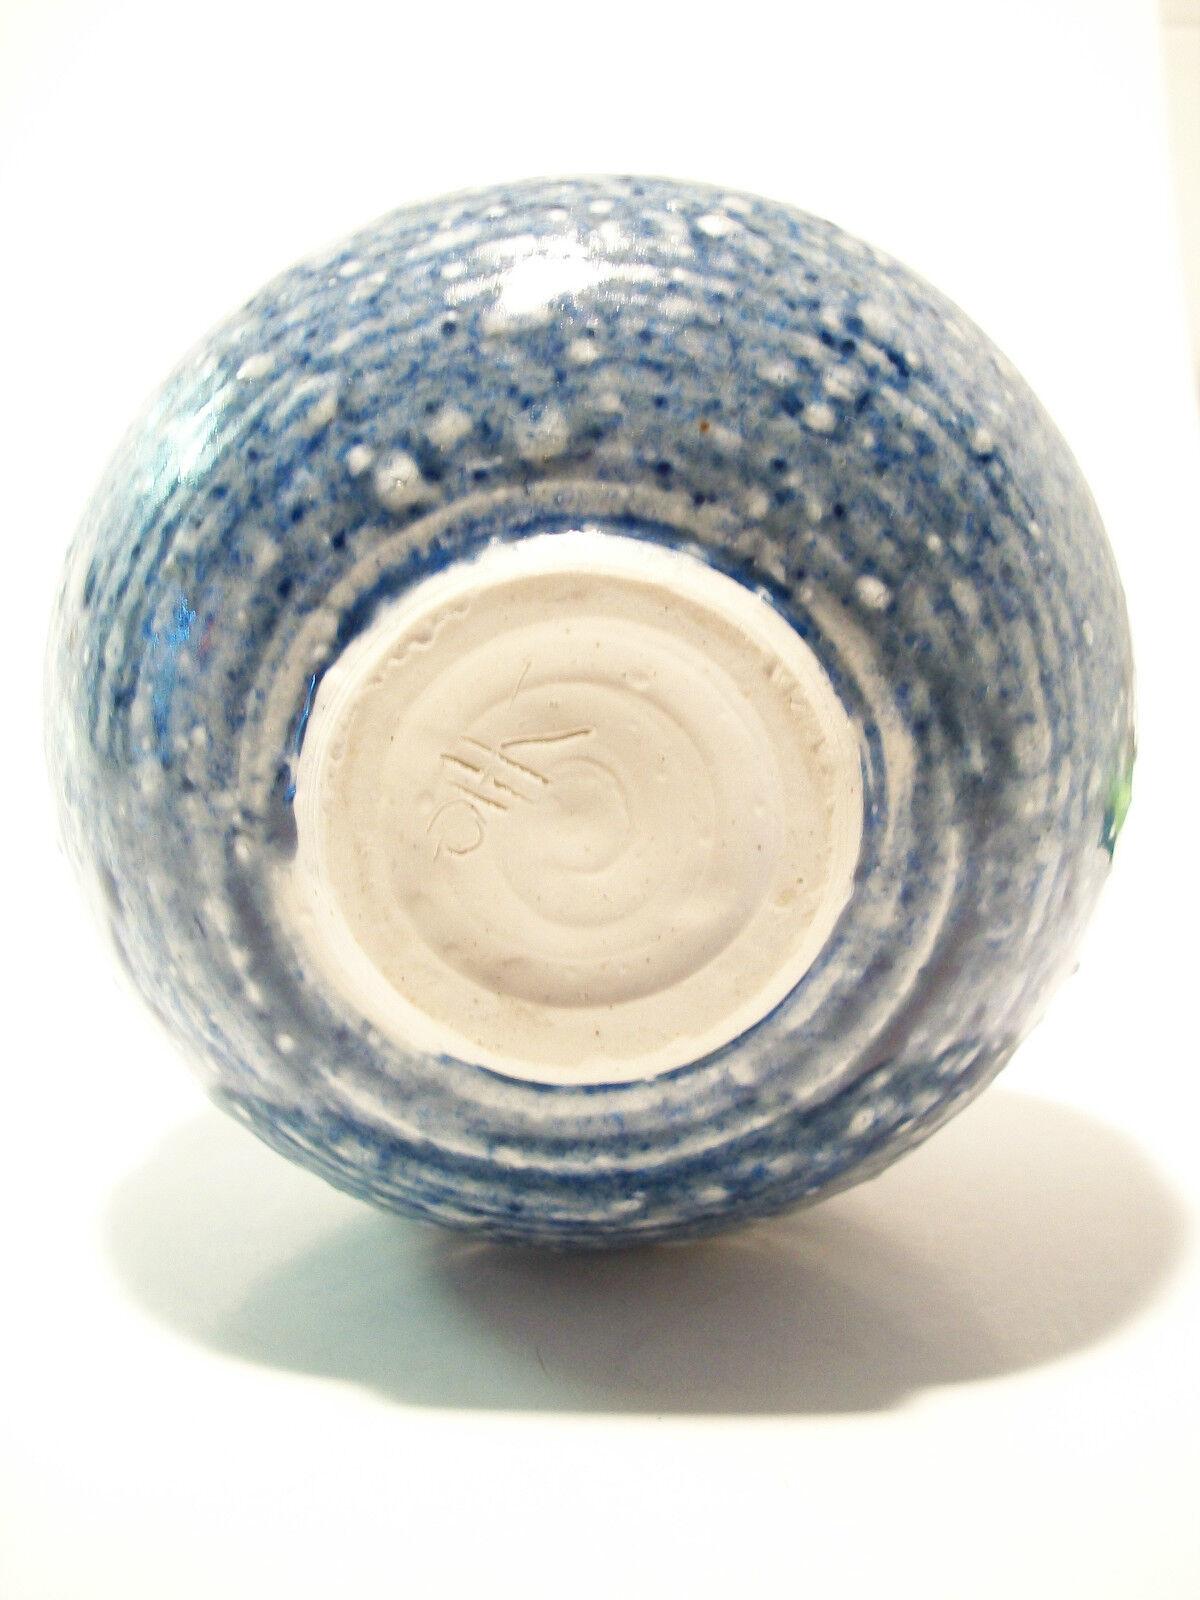 Vintage Studio Pottery Vase - Manipulated Rim - Signed - Late 20th Century For Sale 1